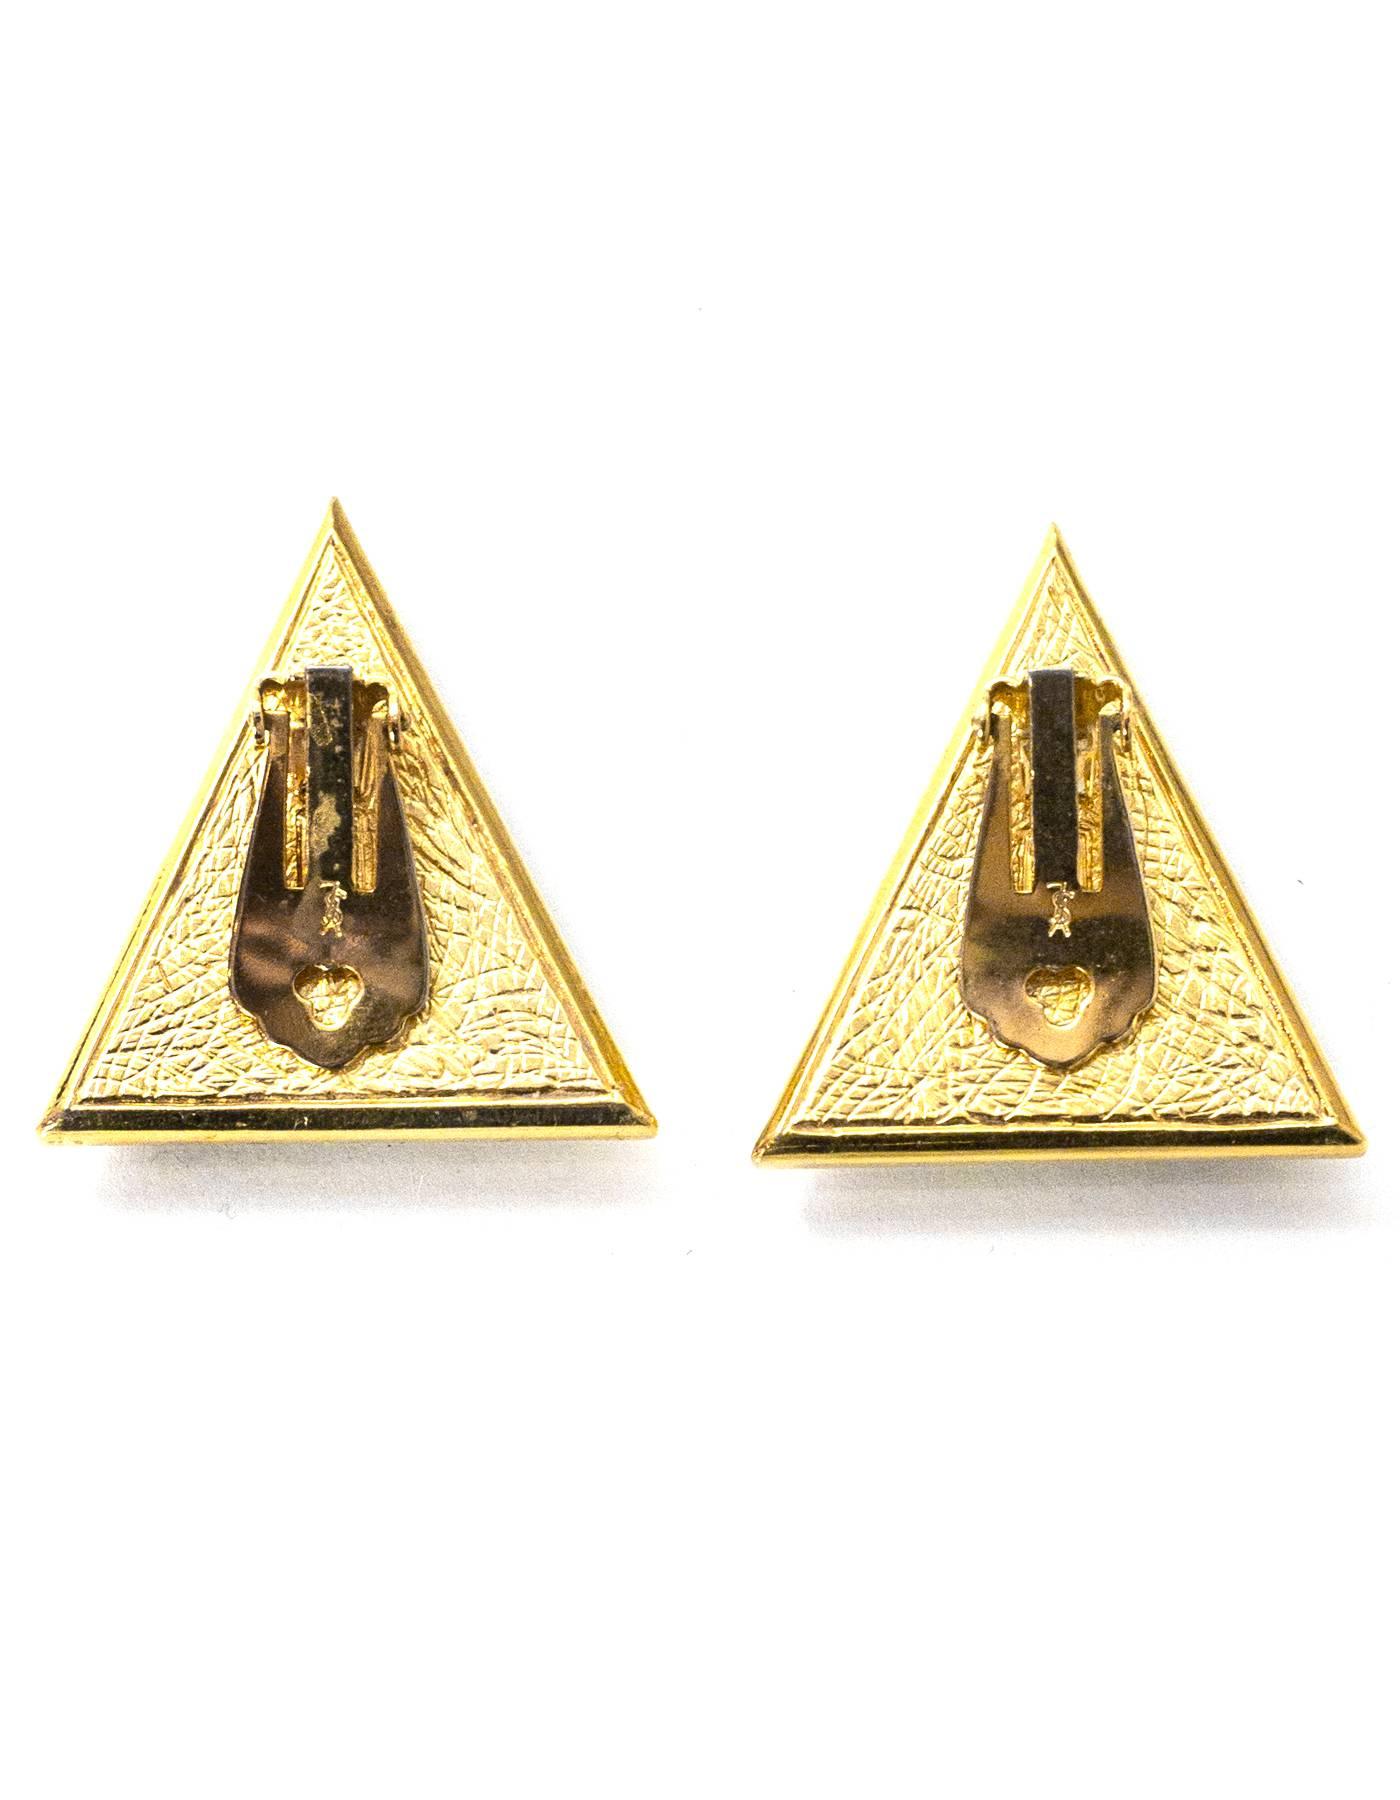 Yves Saint Laurent Vintage Triangle Pave Clip-On Earrings

Color: Gold, blue, black, white
Materials: Metal, enamel, crystal
Closure: Clip-on
Overall Condition: Excellent vintage pre-owned condition
Measurements: 
Length: 1.25"
Width: 1.25"